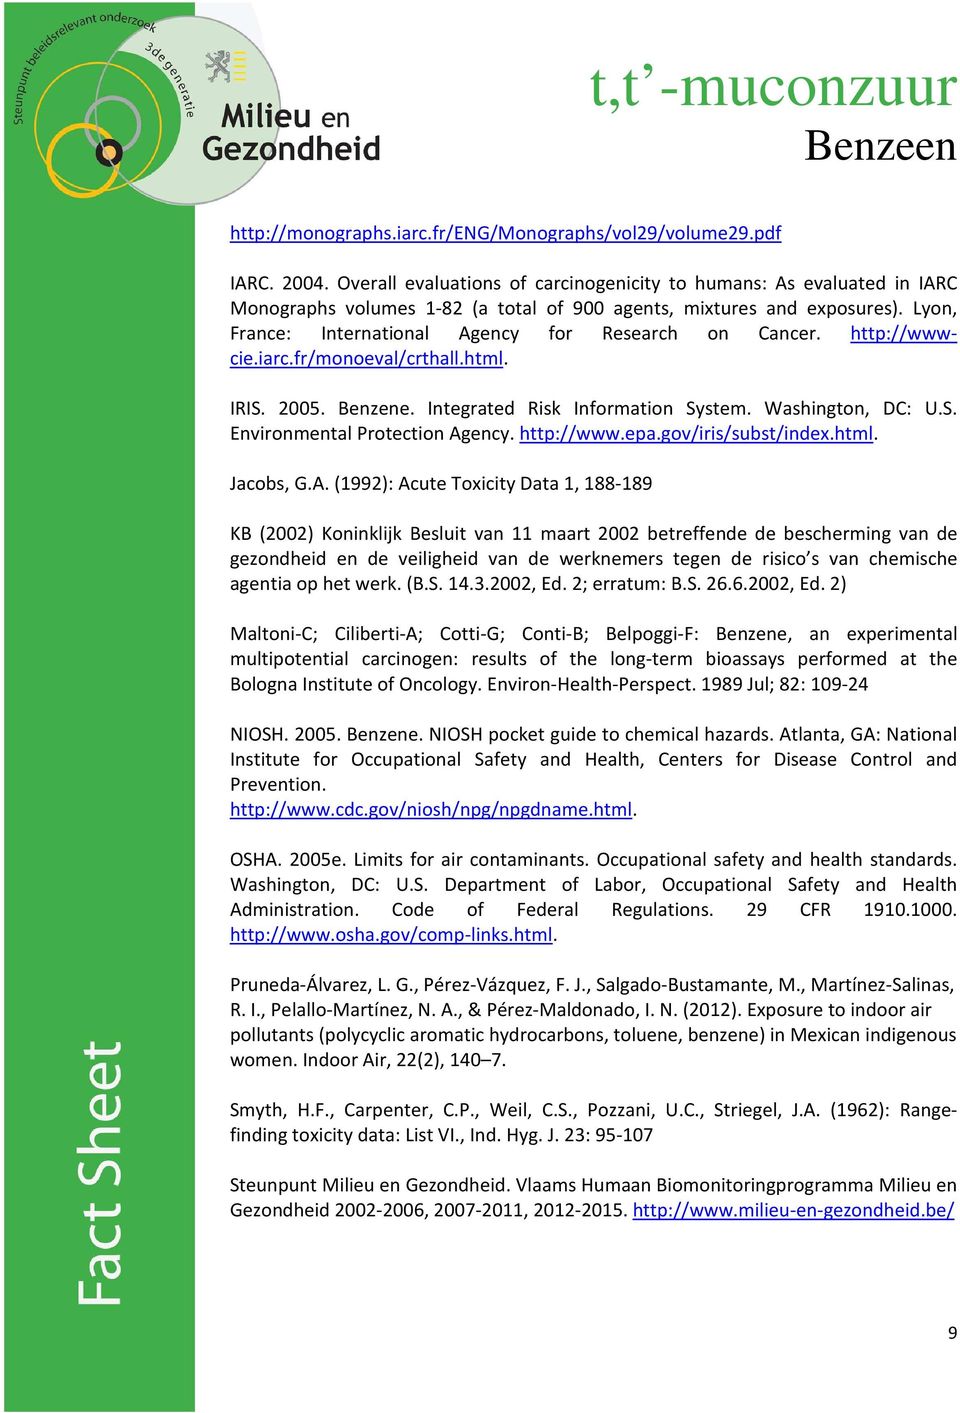 Lyon, France: International Agency for Research on Cancer. http://wwwcie.iarc.fr/monoeval/crthall.html. IRIS. 2005. Benzene. Integrated Risk Information System. Washington, DC: U.S. Environmental Protection Agency.